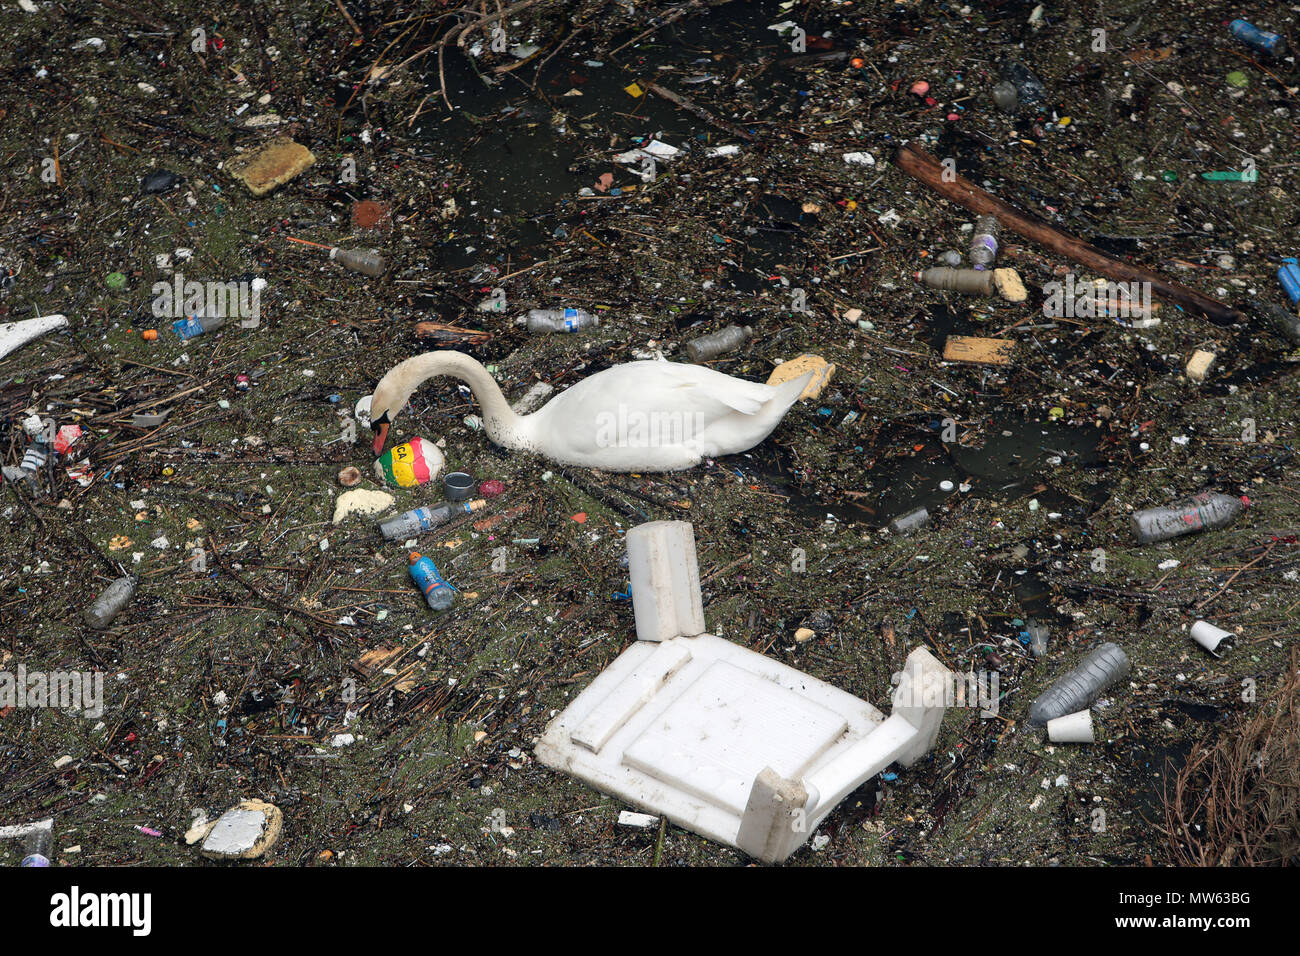 A swan swims and feeds amoungst the rubbish and pollution thrown into the River Thames in Limehouse London Stock Photo